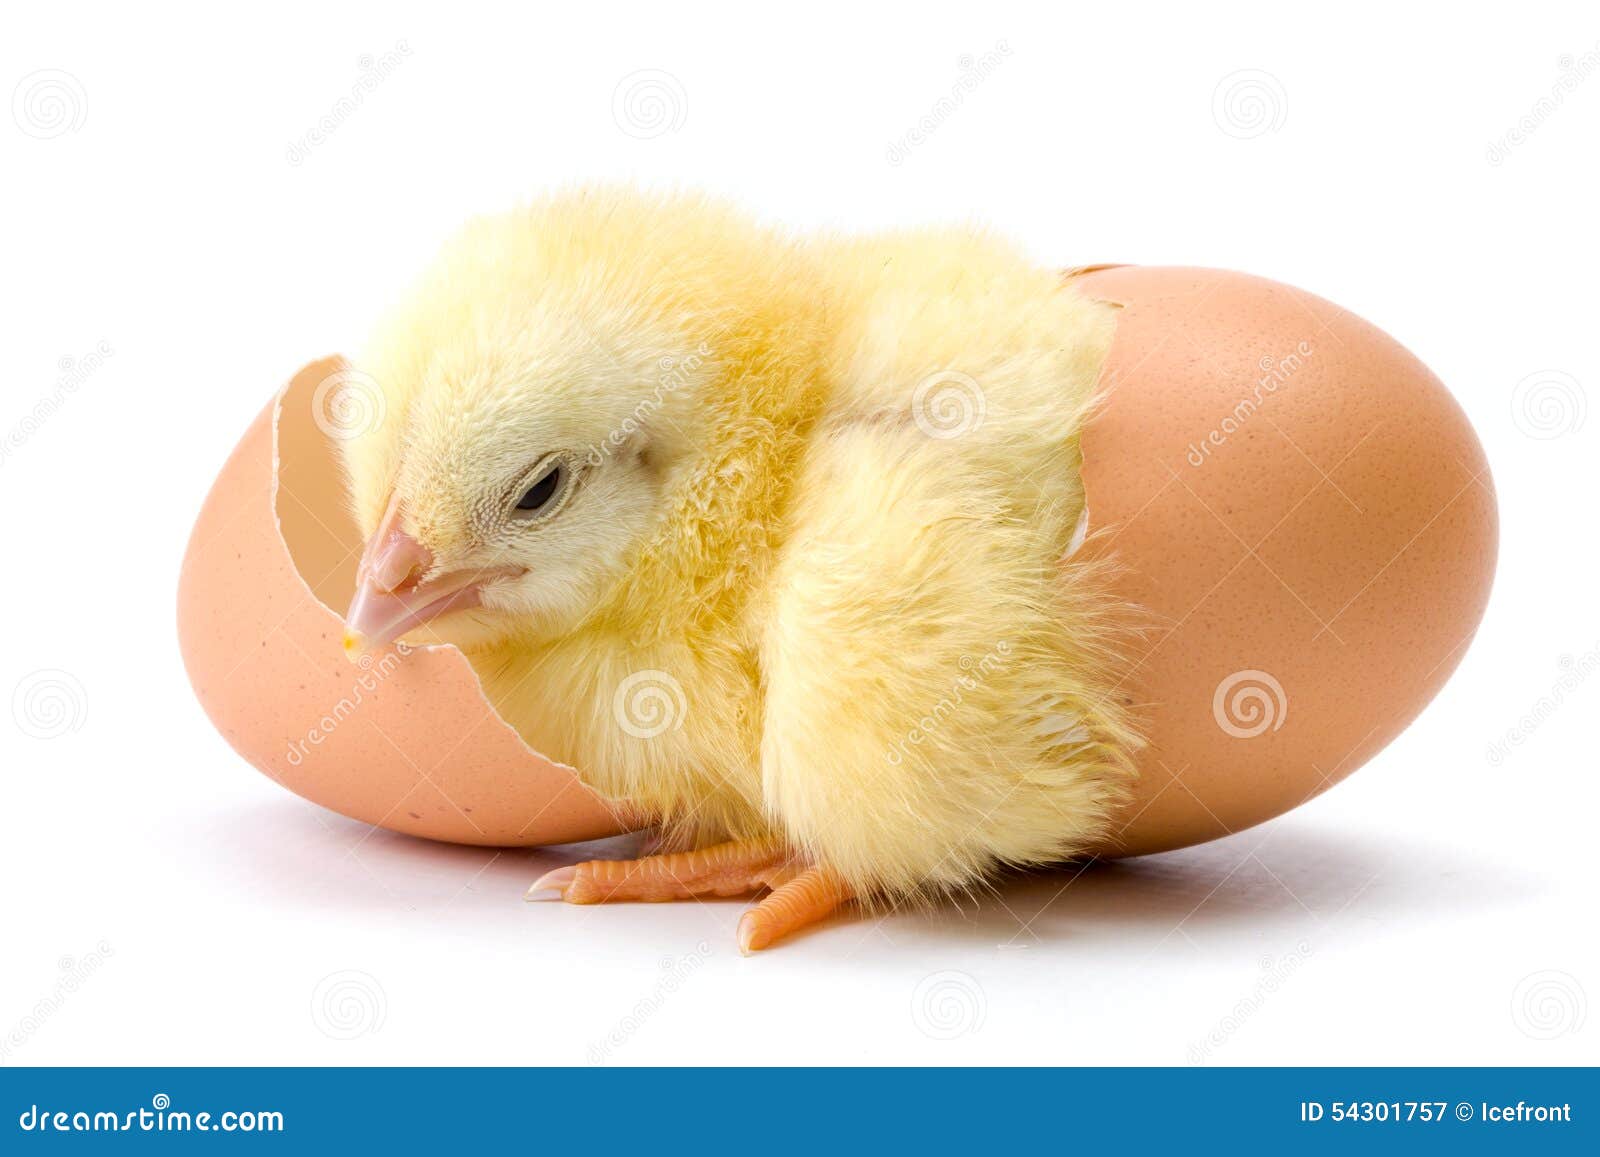 Yellow Chicken Hatching From Egg Royalty Free Stock Photography